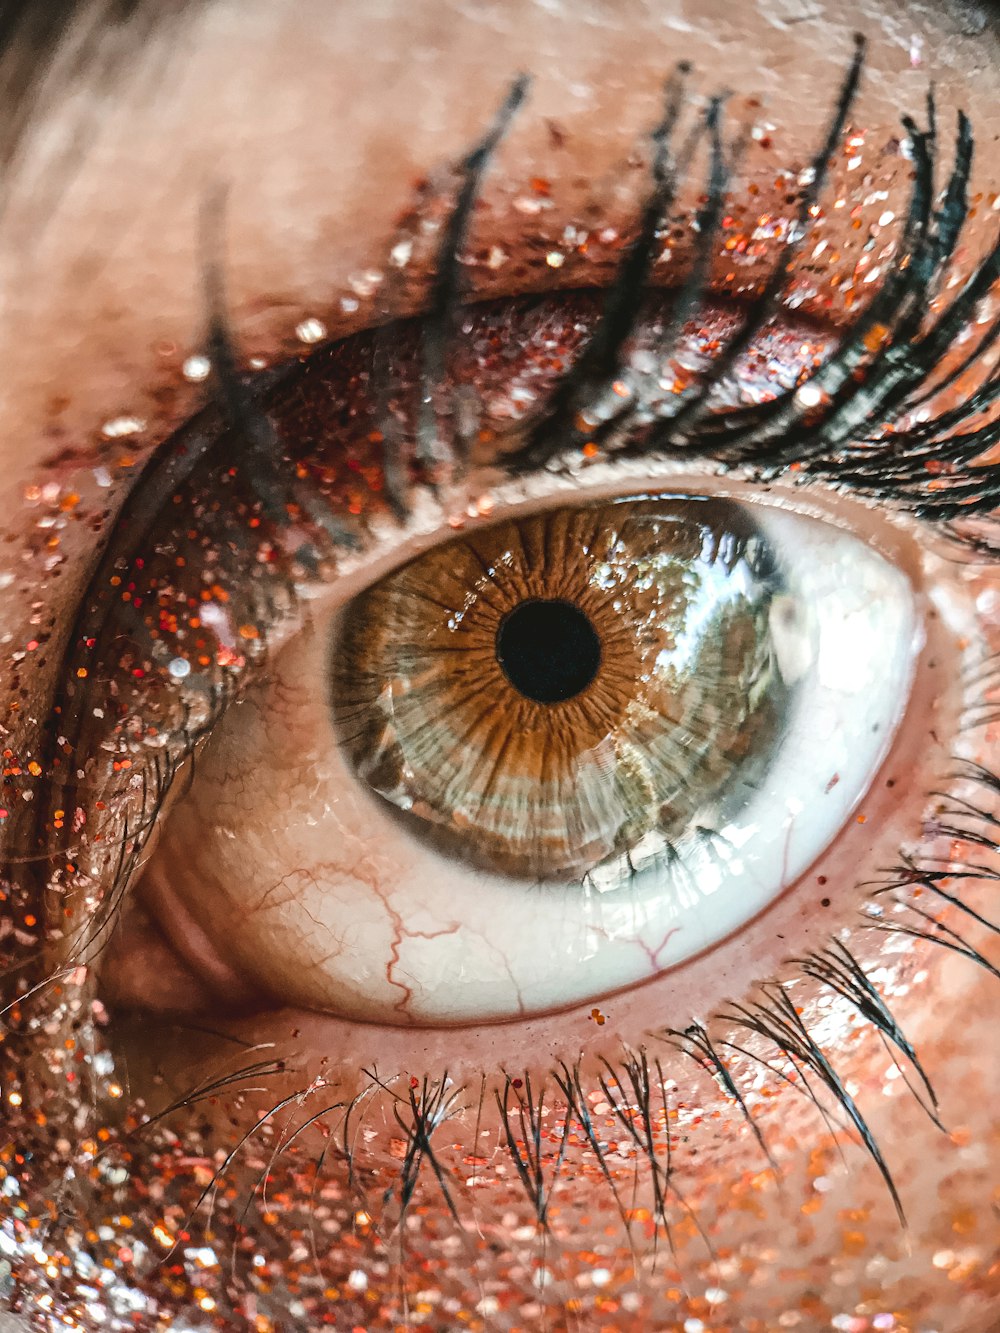 human eye in close up photography